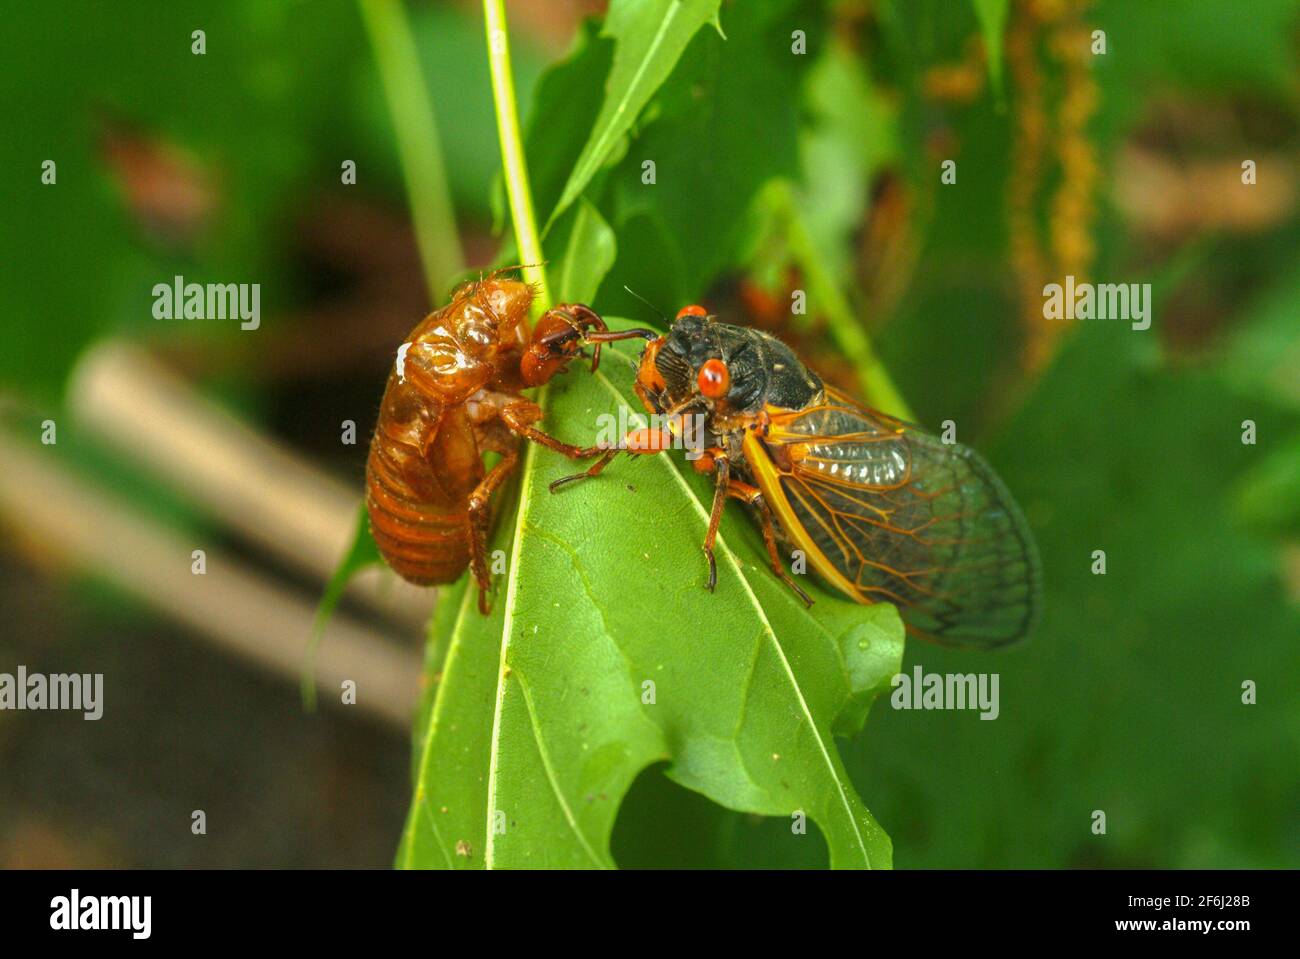 USA Maryland Insect Cicada Cicadas Cicadoidea Brood X 17 year cicada emerges from the ground to reproduce Stock Photo